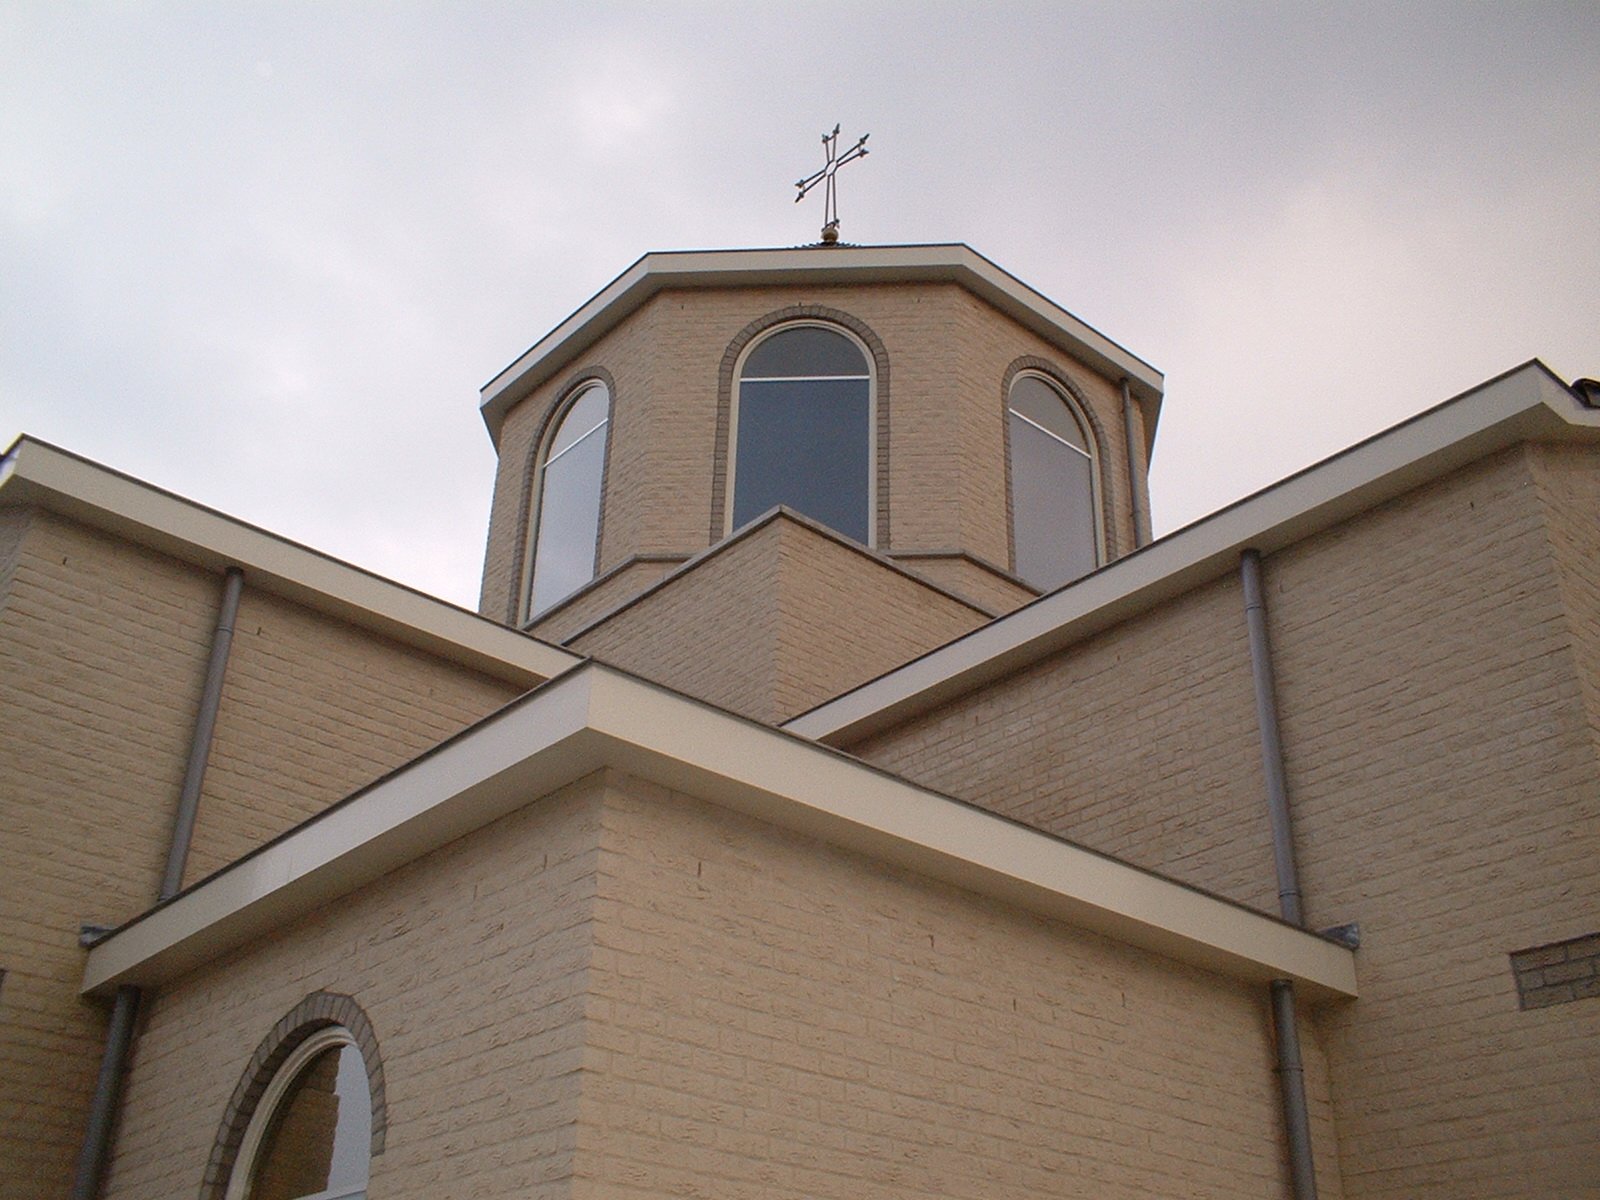 an angled view of a church's front of building with a steeple